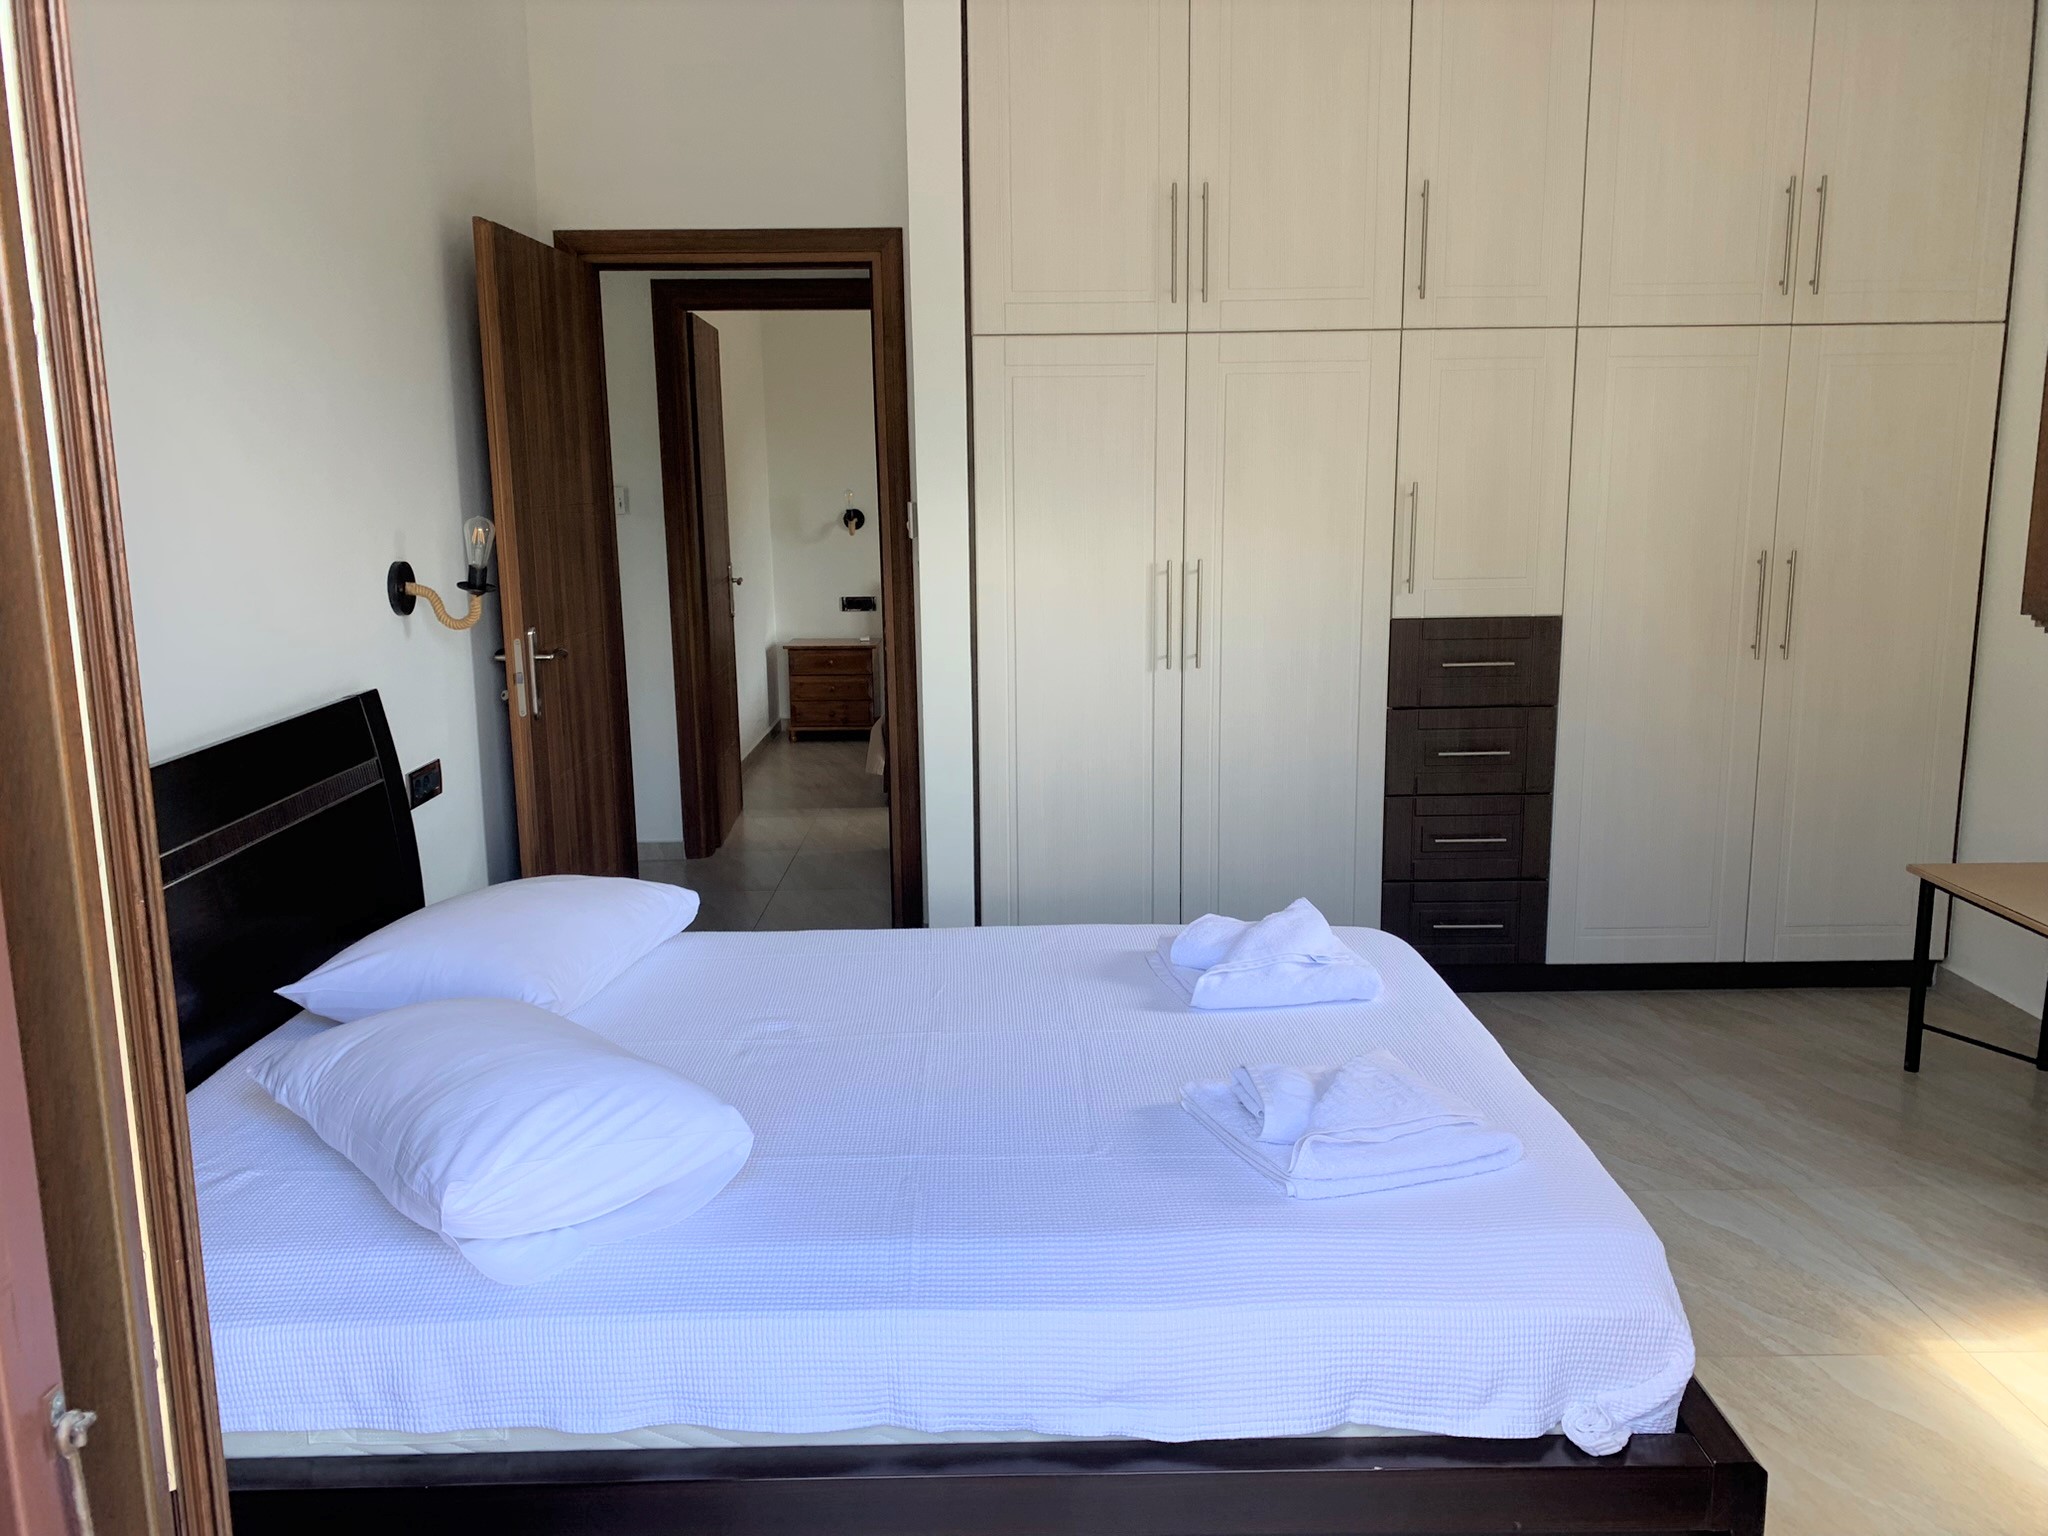 Bedroom of house for rent on Ithaca Greece, Stavros